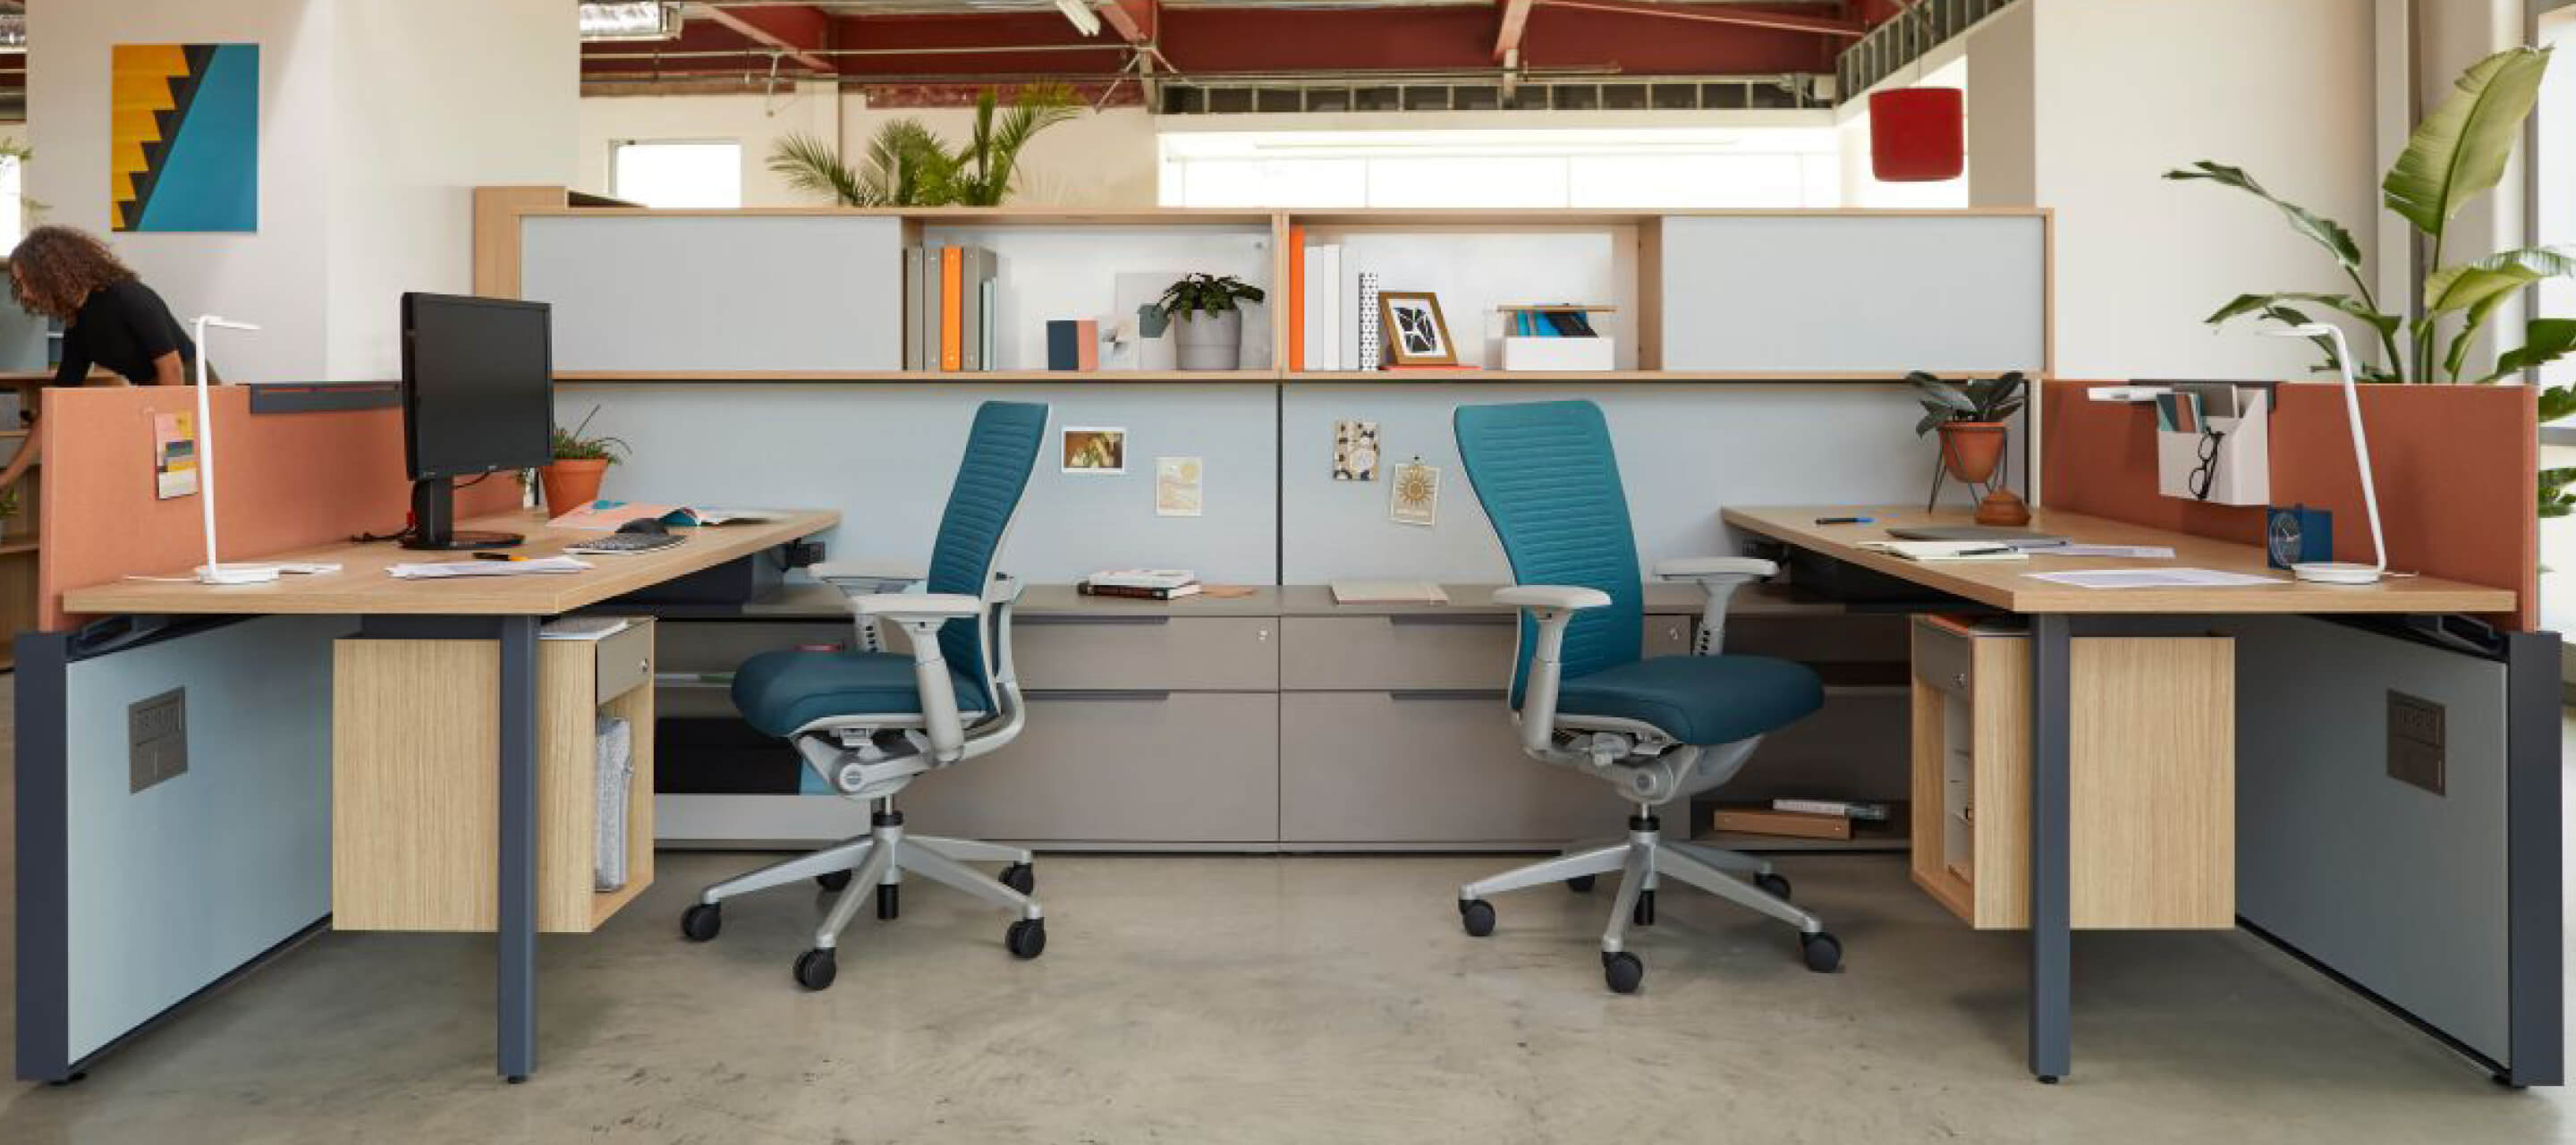 Individual workspaces featuring Zody swivel chairs and Behold office storage.